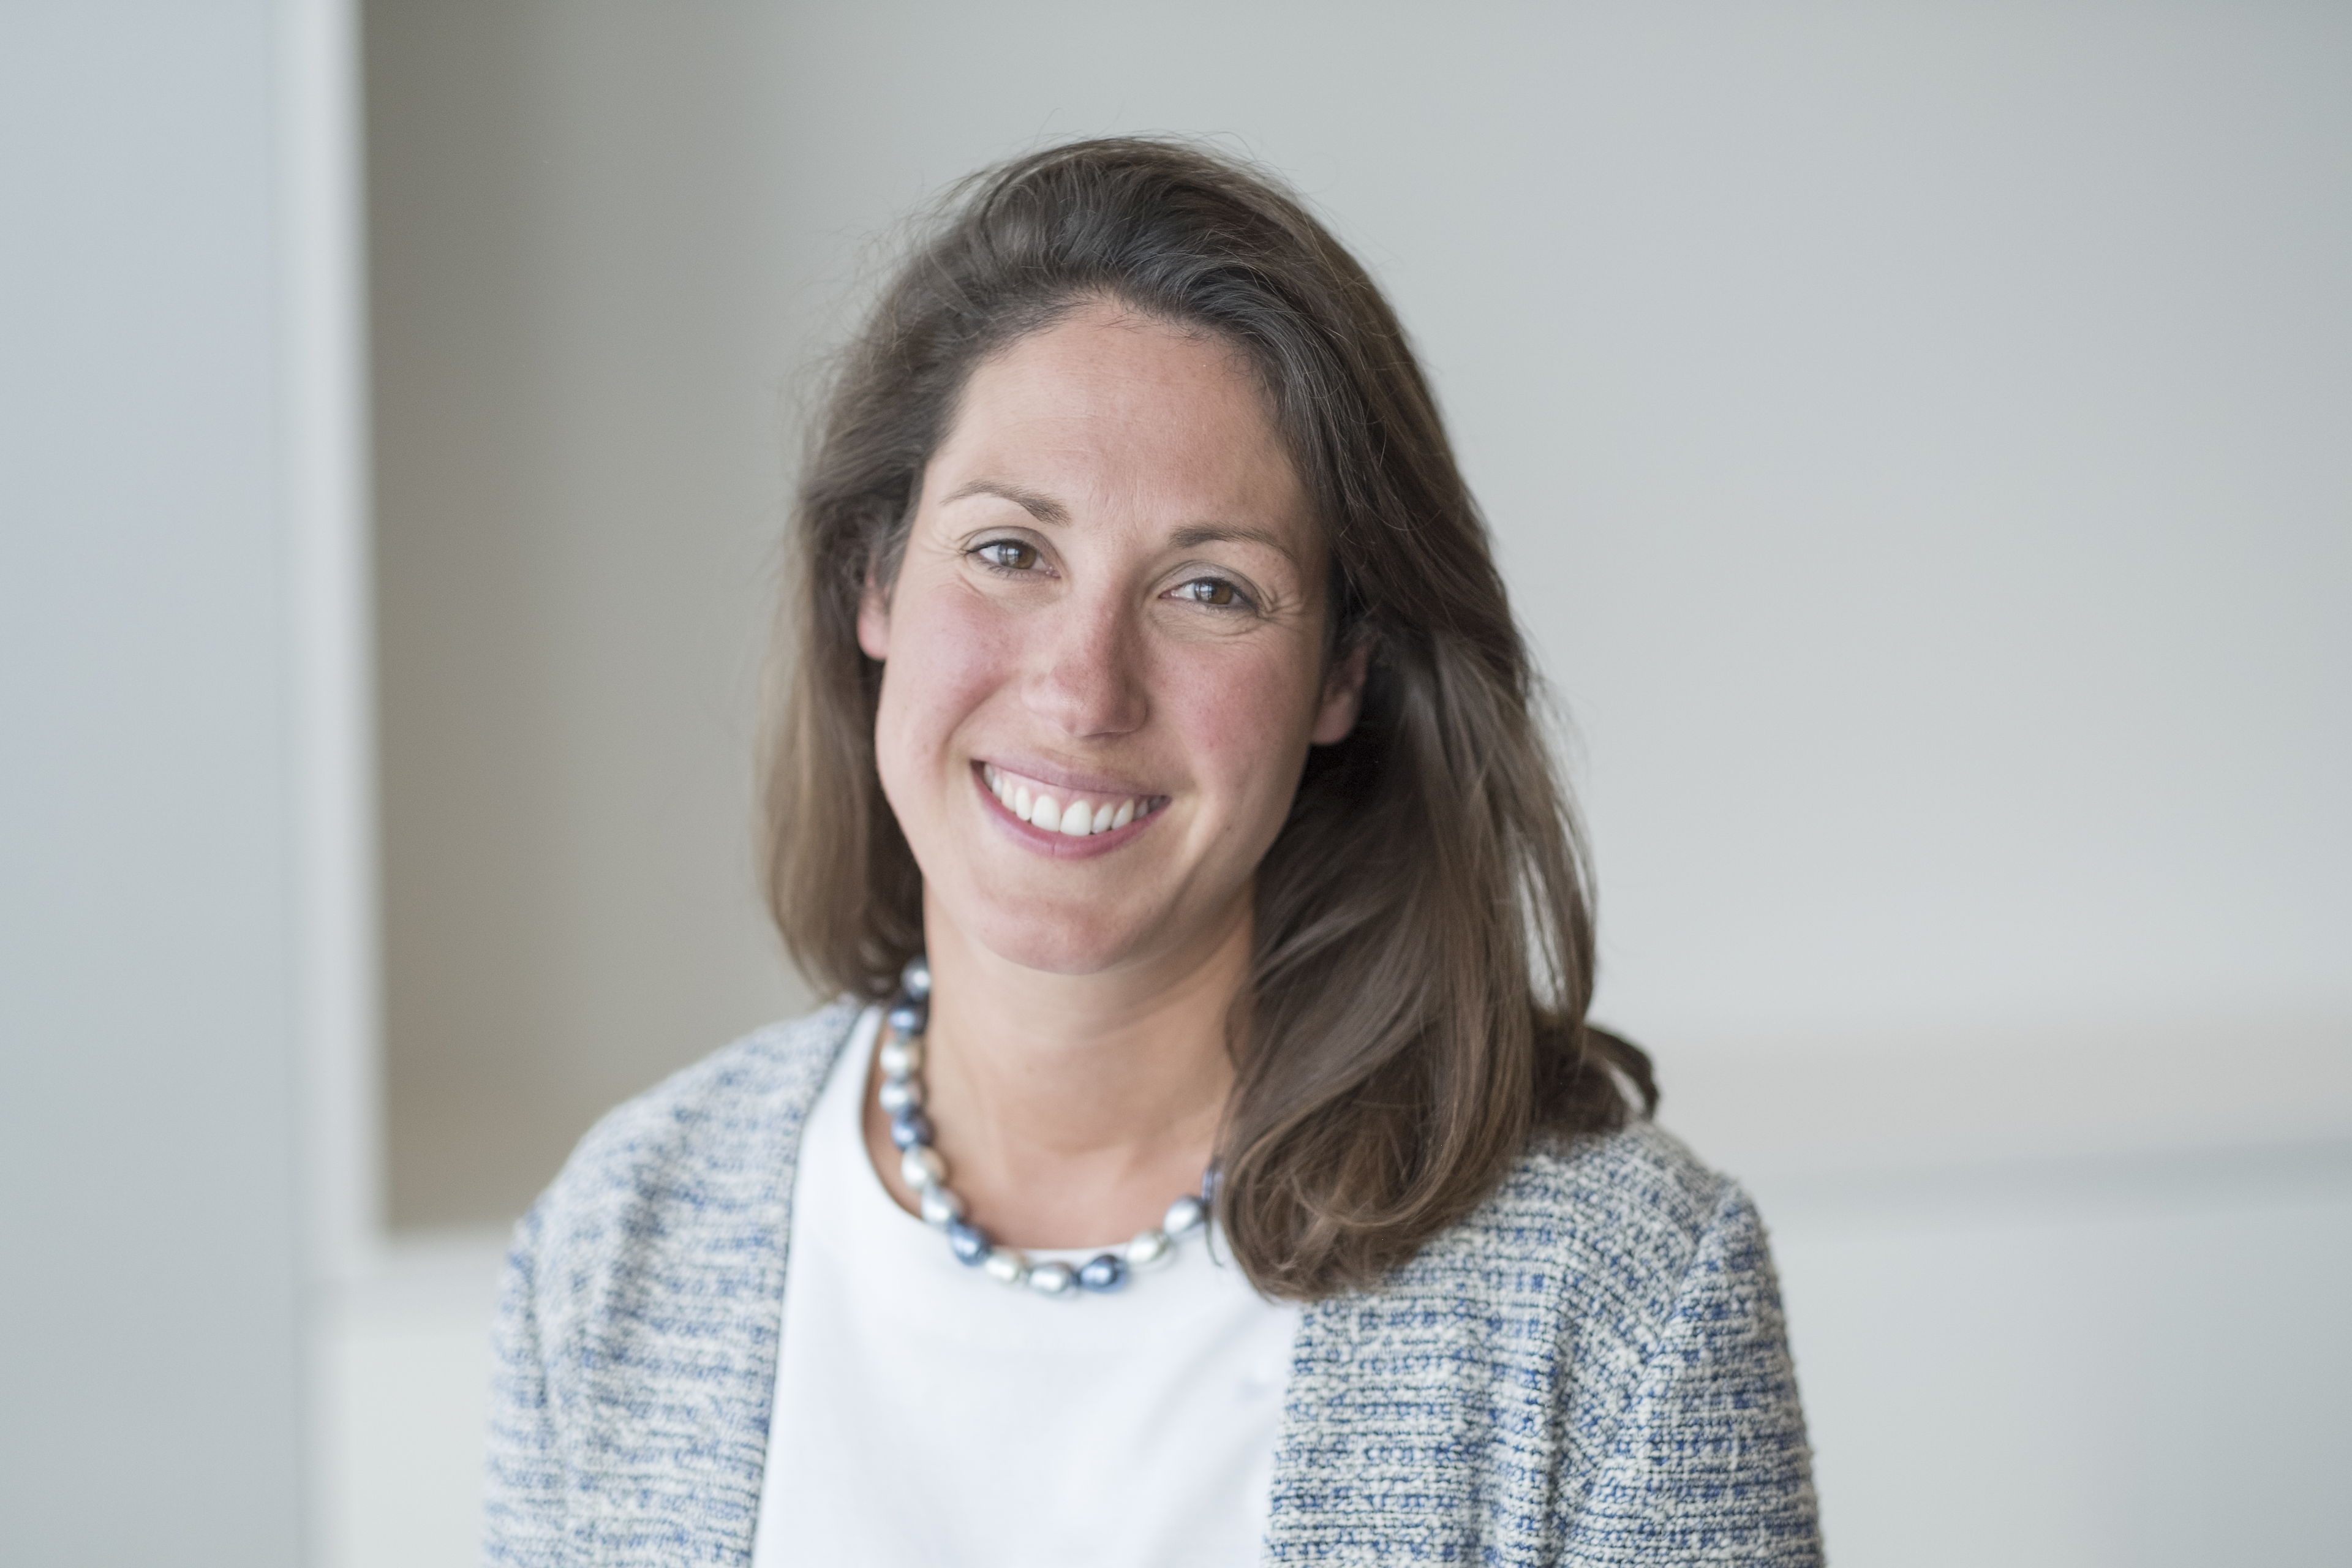 Columbia Threadneedle Investments appoints Michaela Collet Jackson as Head of Distribution, EMEA